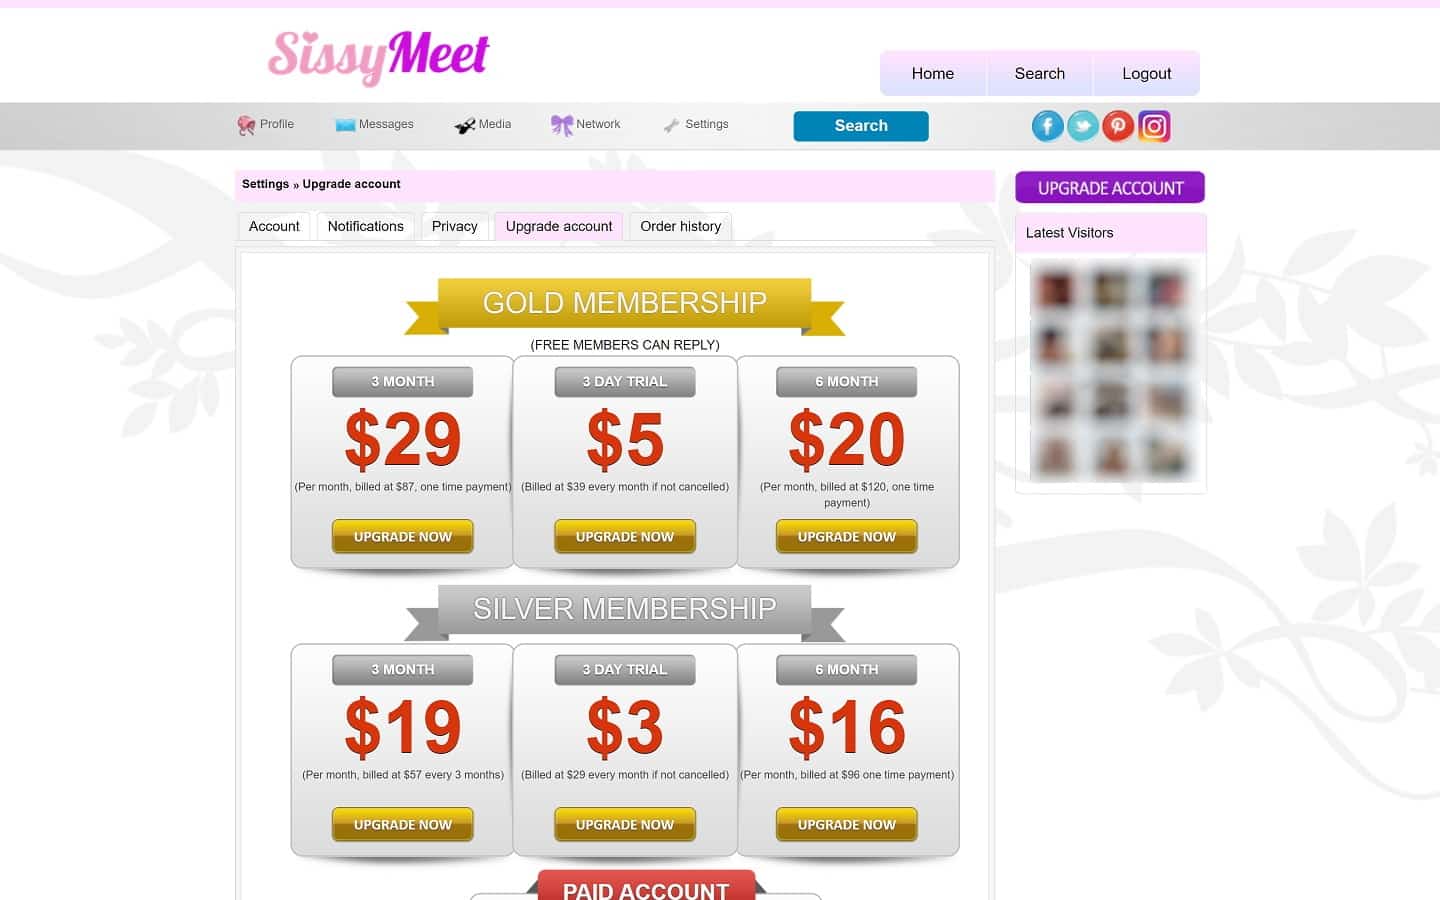 Review SissyMeet.com payment